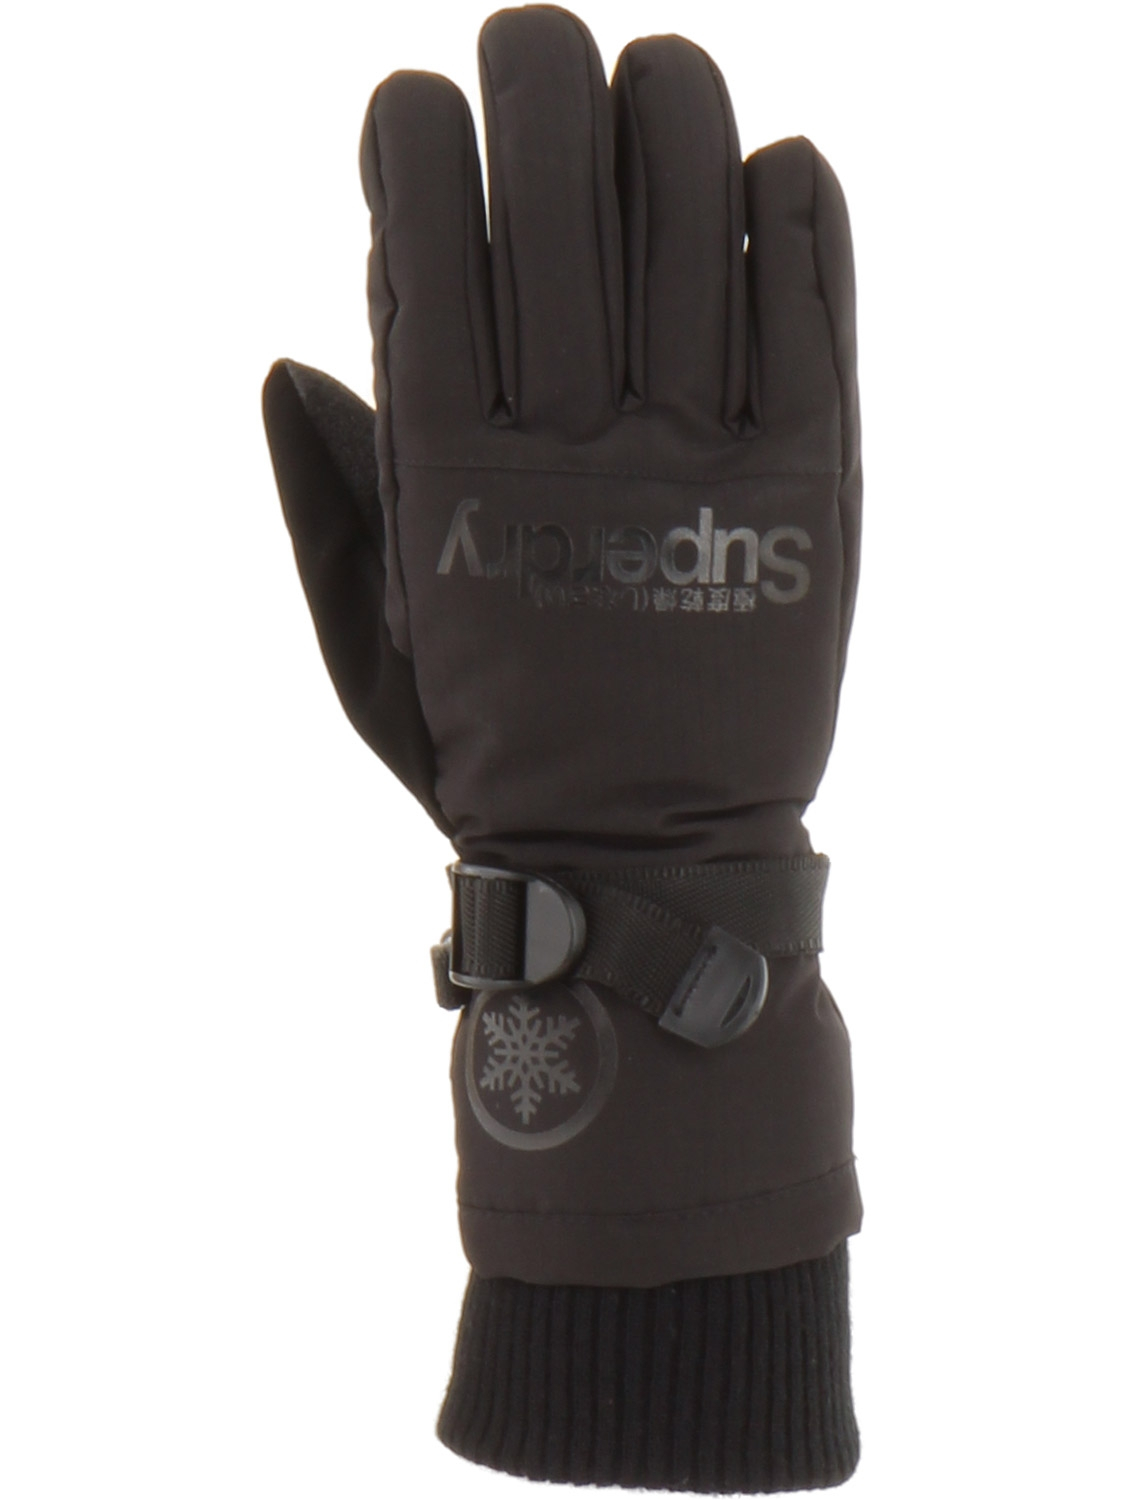 Superdry Womens Ultimate Snow Service Glove Black - Size: 10-12